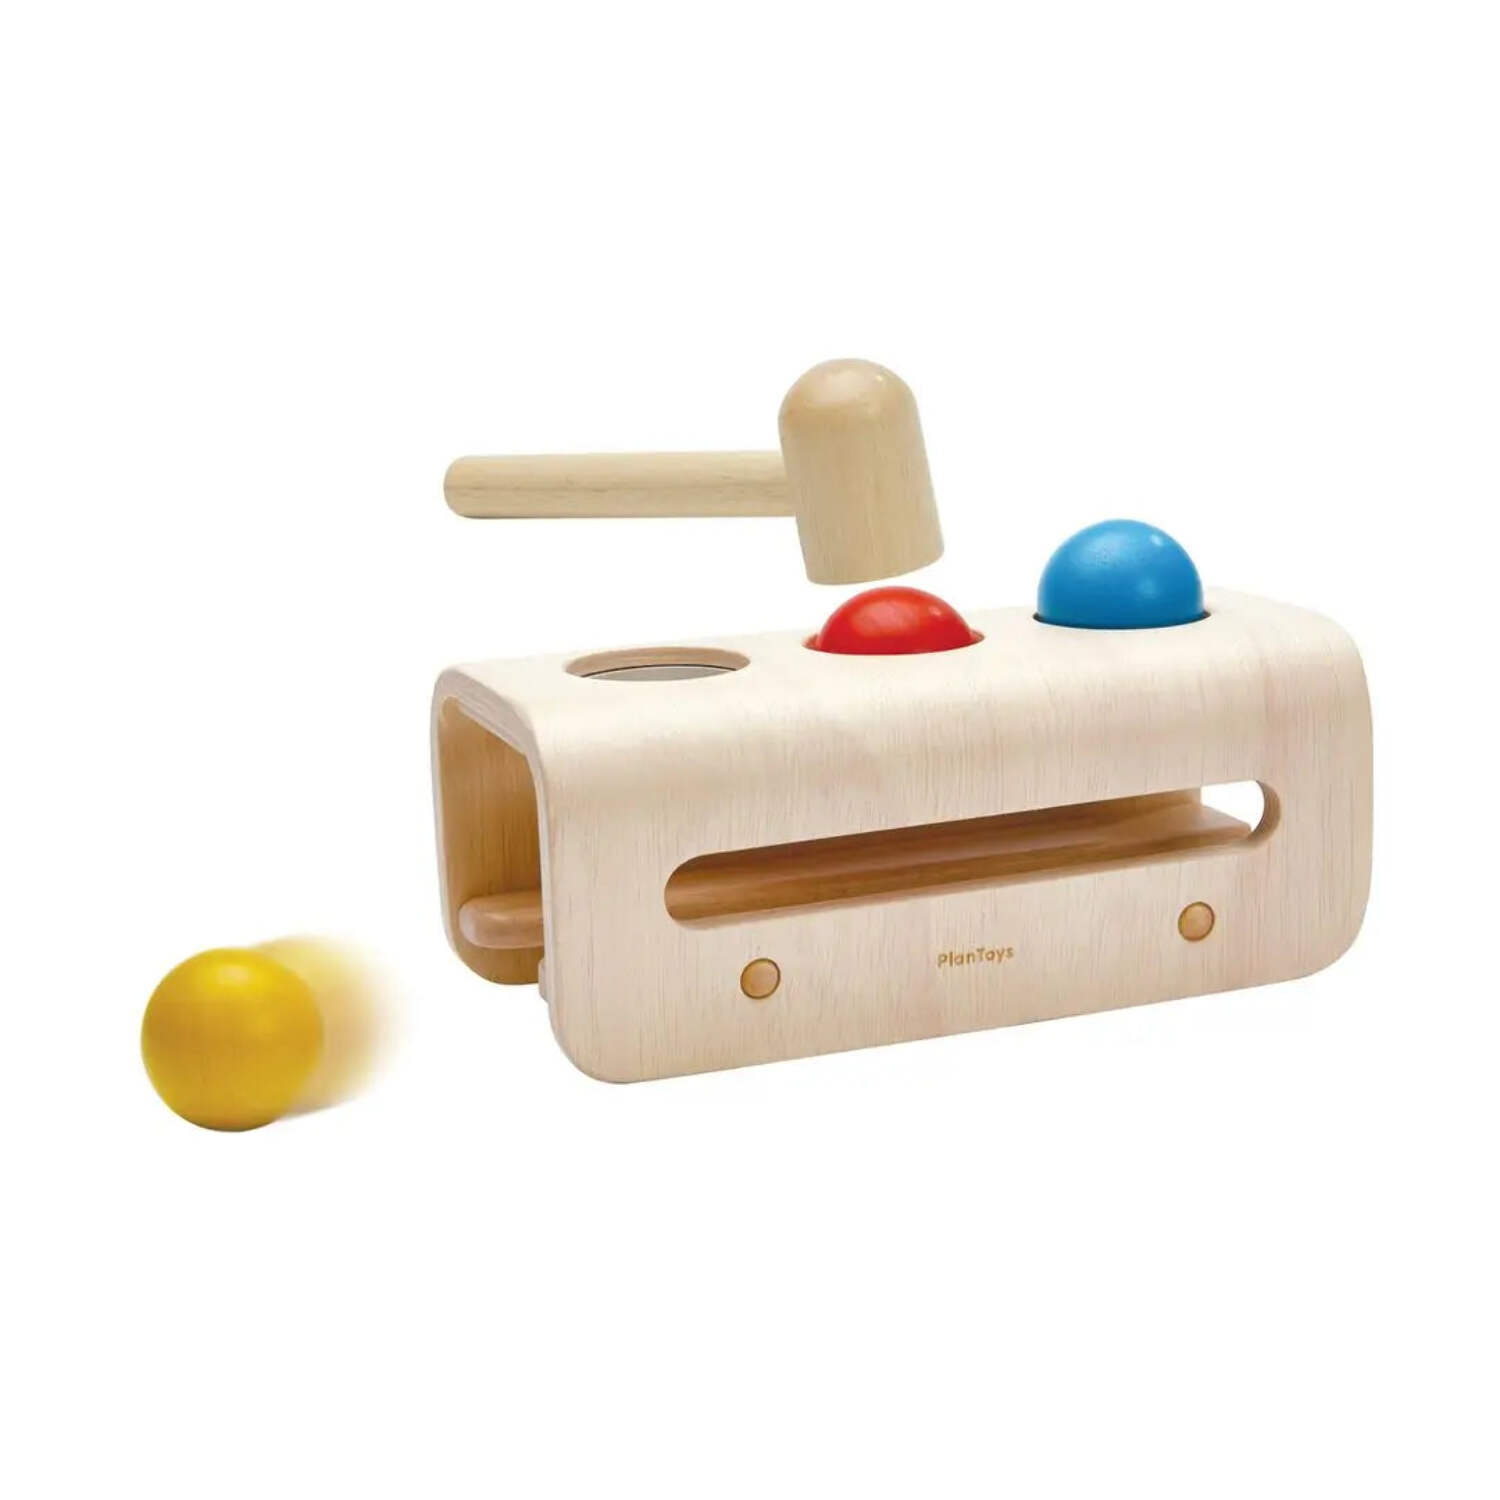 PlanToys Wooden Hammer Balls Pounding and Hammering Toy - image 3 of 4